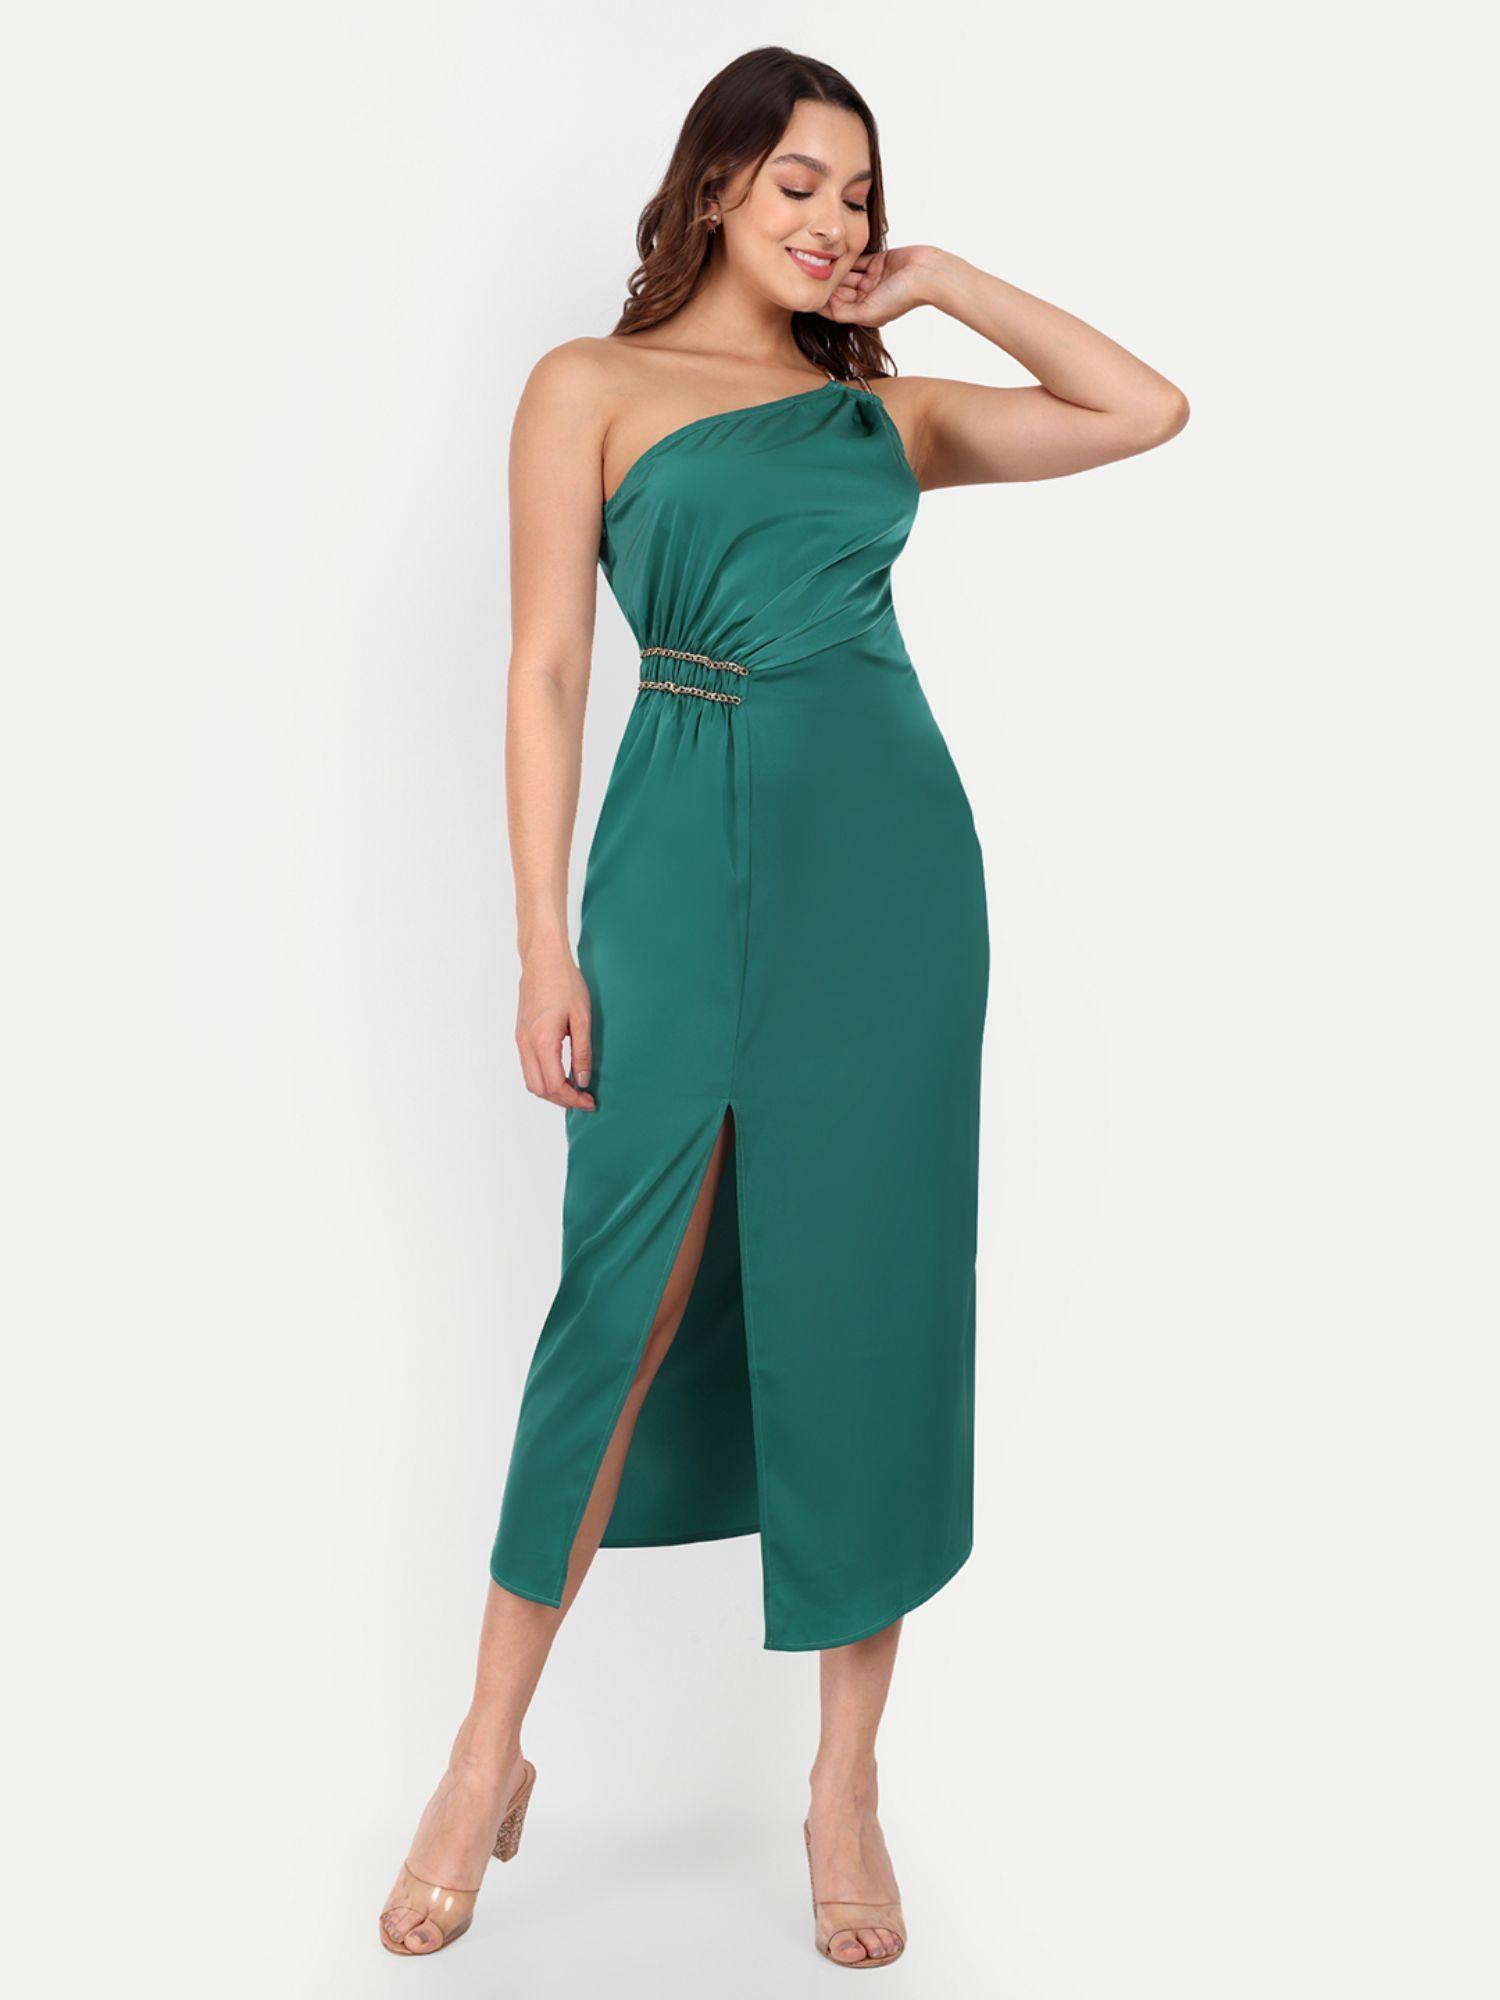 green satin one-shoulder midi dress with chain straps